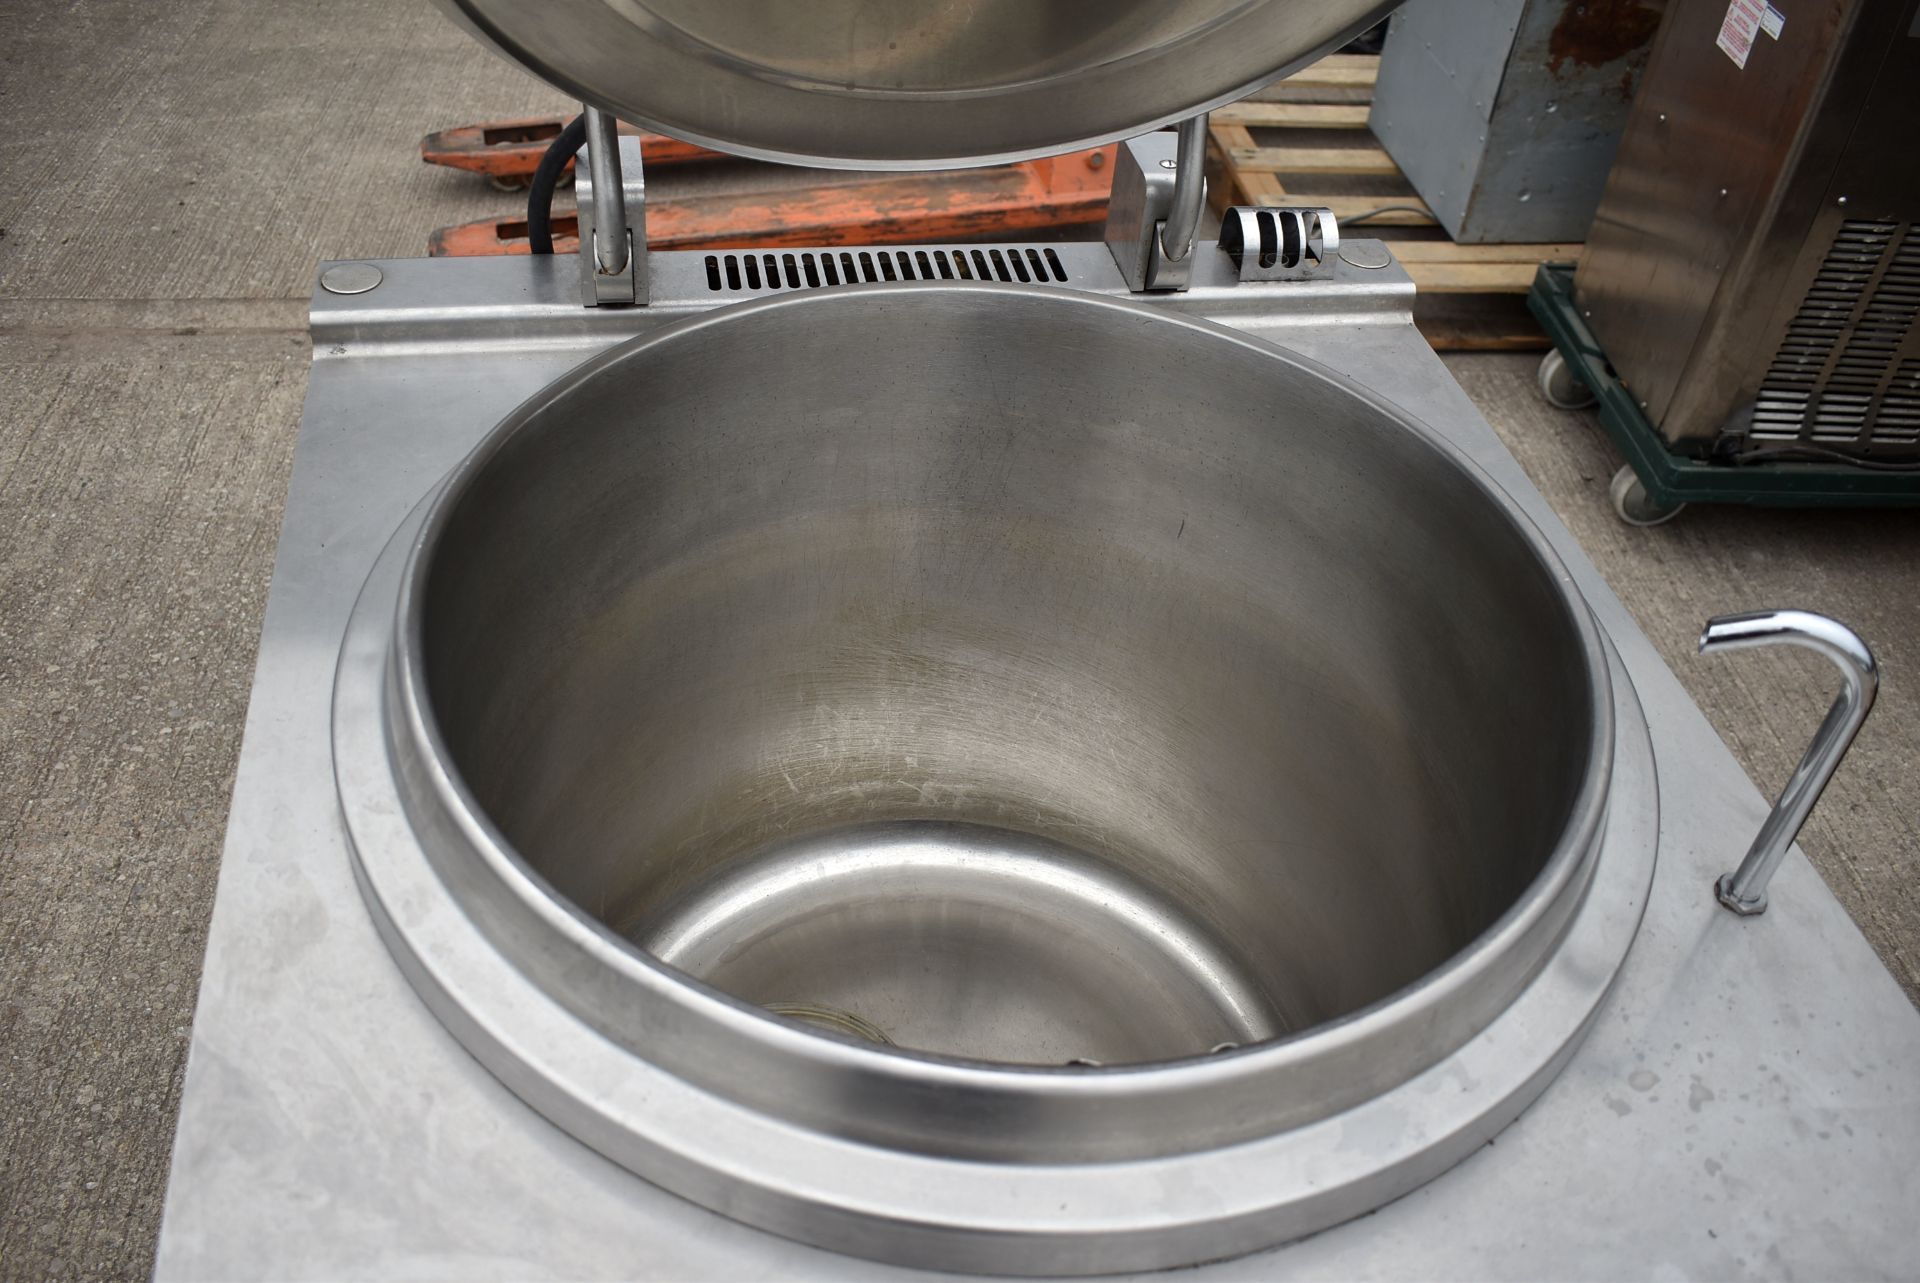 1 x Bonnet Advancia Boiling Pan With Stainless Steel Finish - 3 Phase - RRP: £8,000 - Image 13 of 14